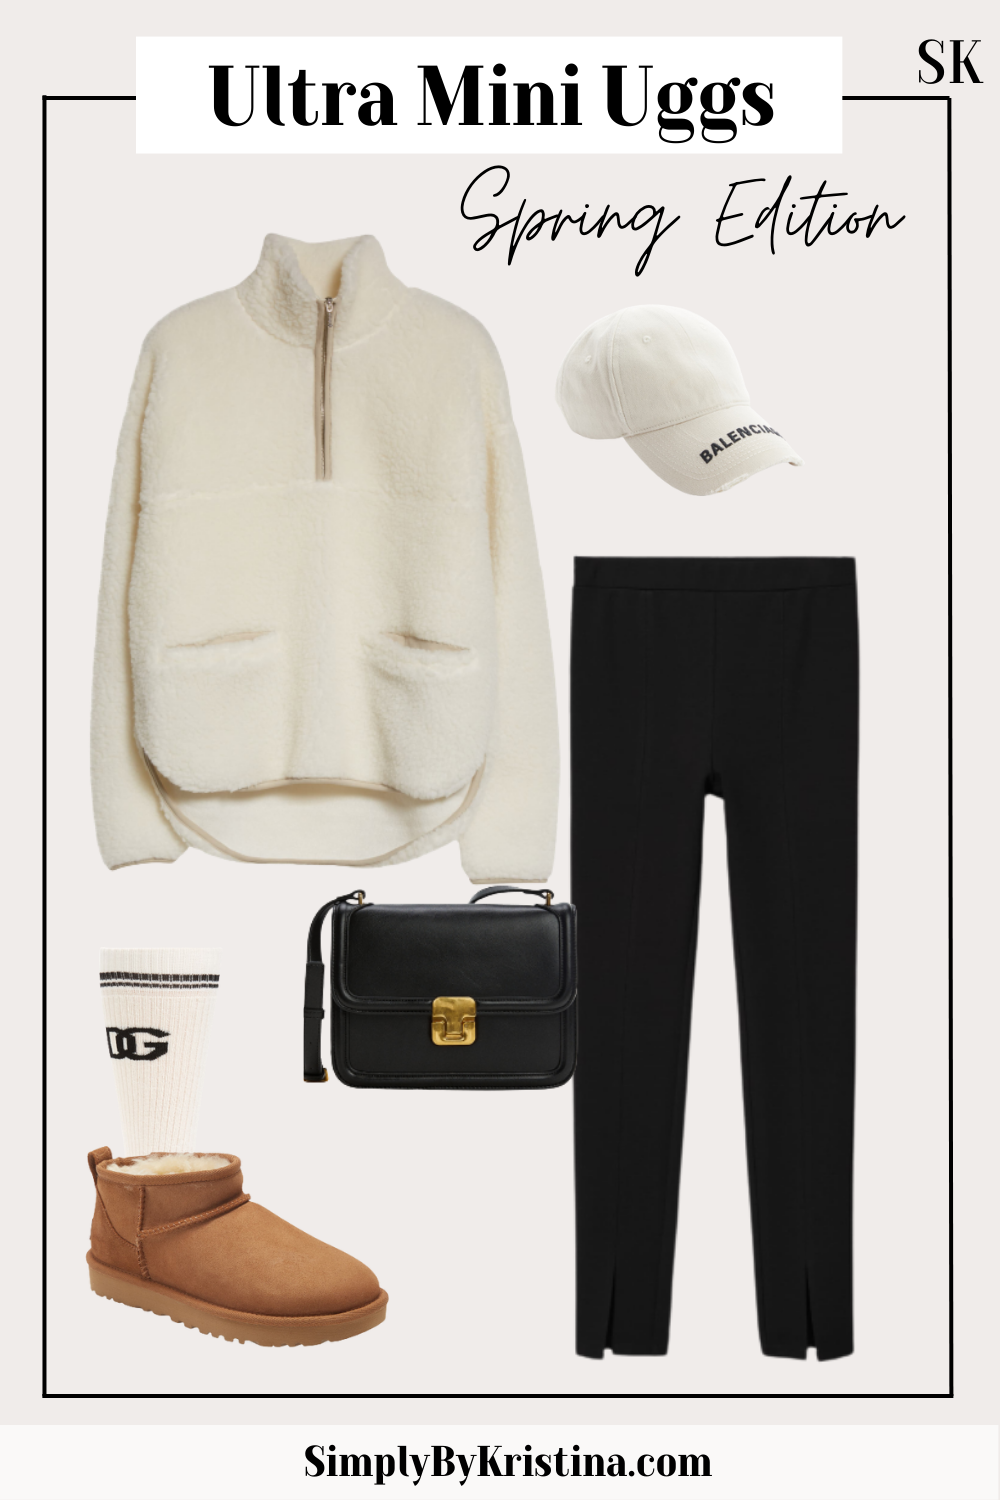 Uggs with Tights Outfits (1 ideas & outfits)